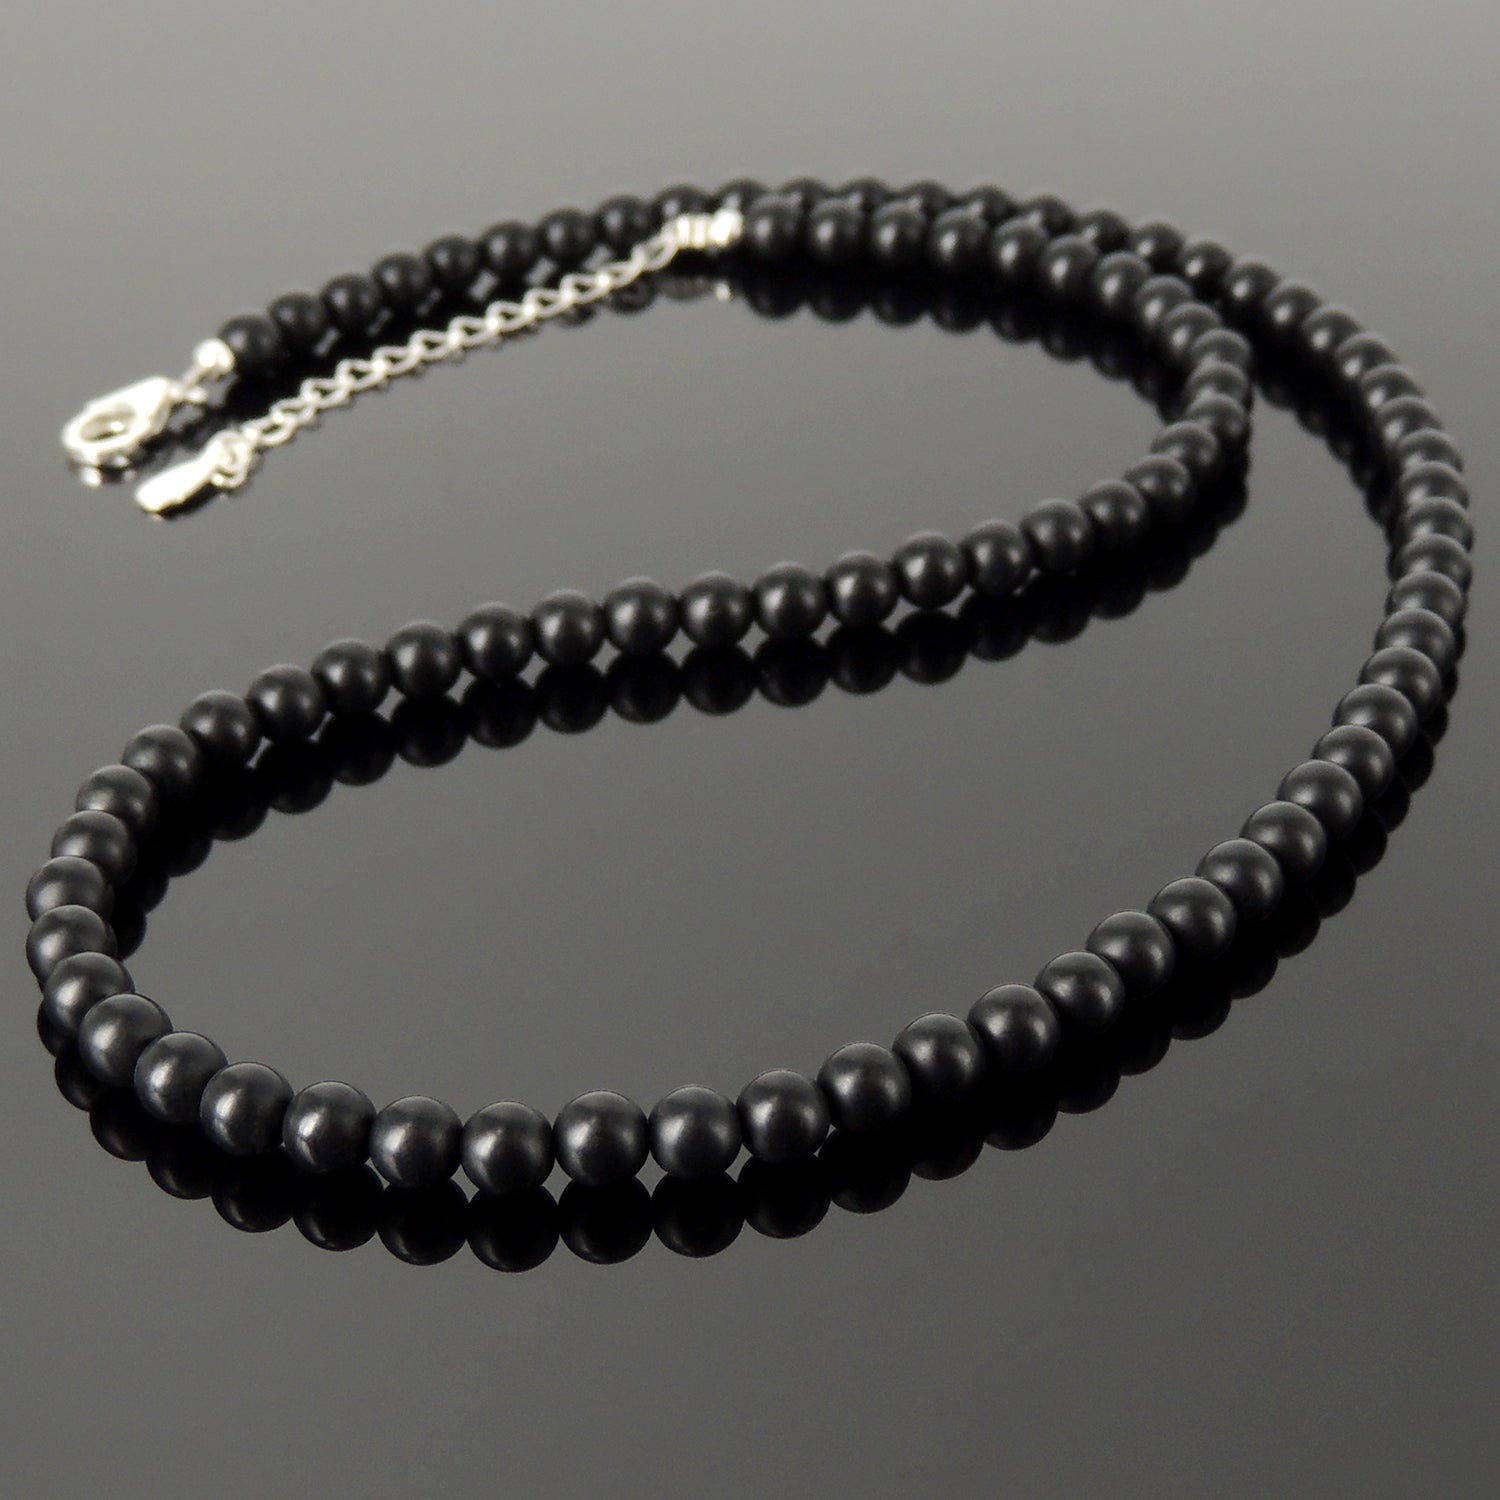 Handmade Adjustable Chain Gemstone Necklace - Men's Women's Casual Wear, Protection with Healing Natural Matte Black Onyx 5mm Beads, Genuine Non-Plated S925 Sterling Silver Clasp NK251